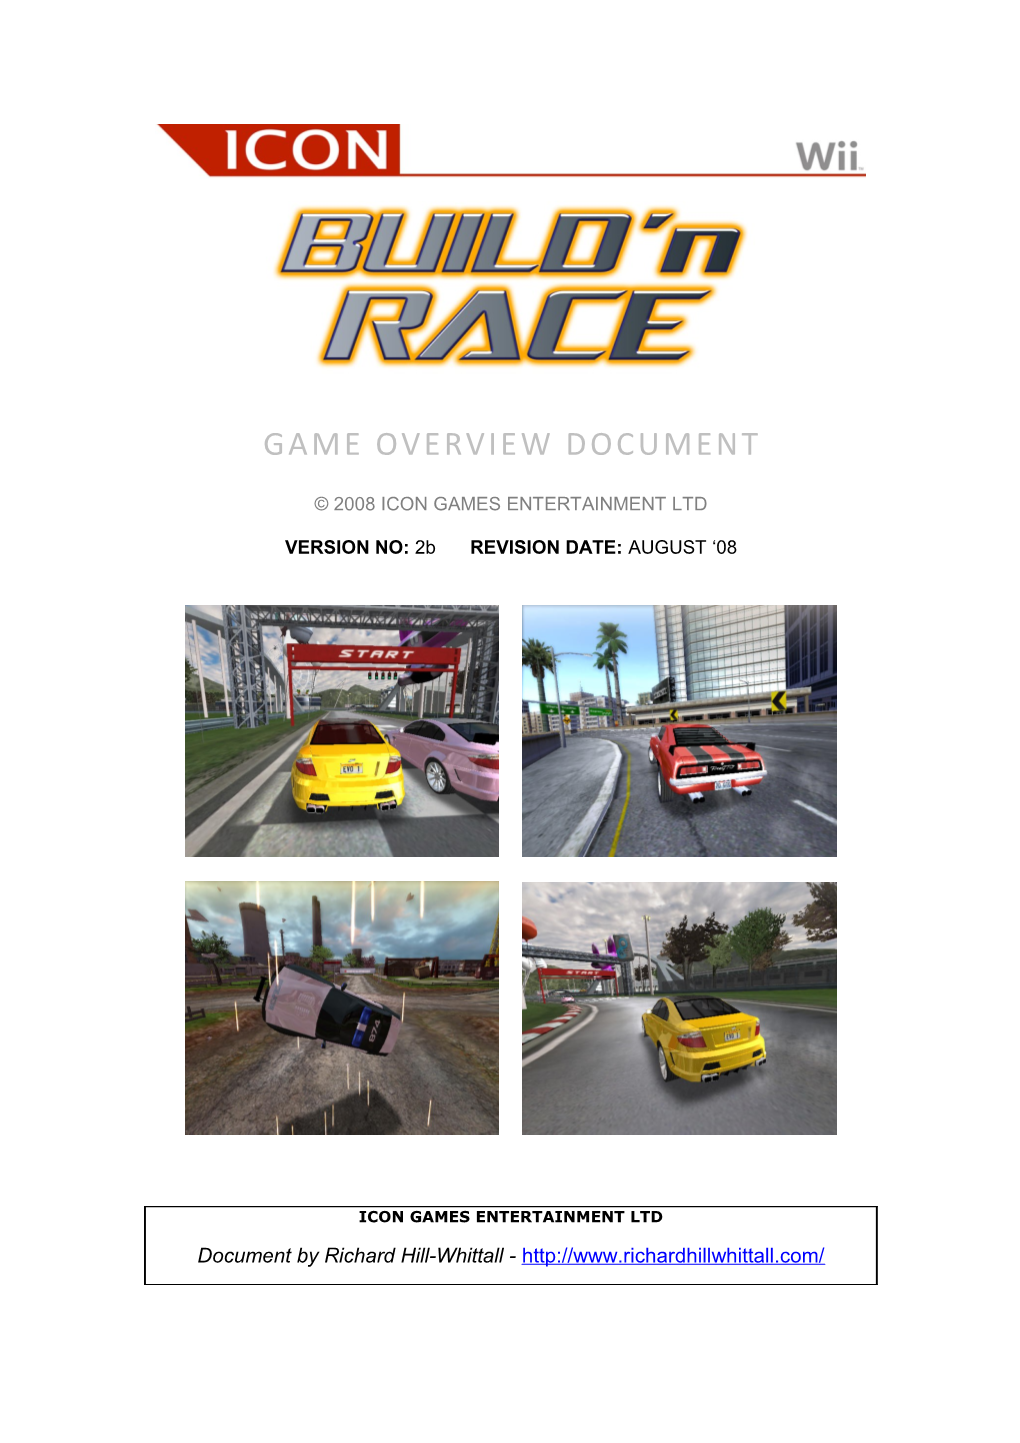 Game Overview Document